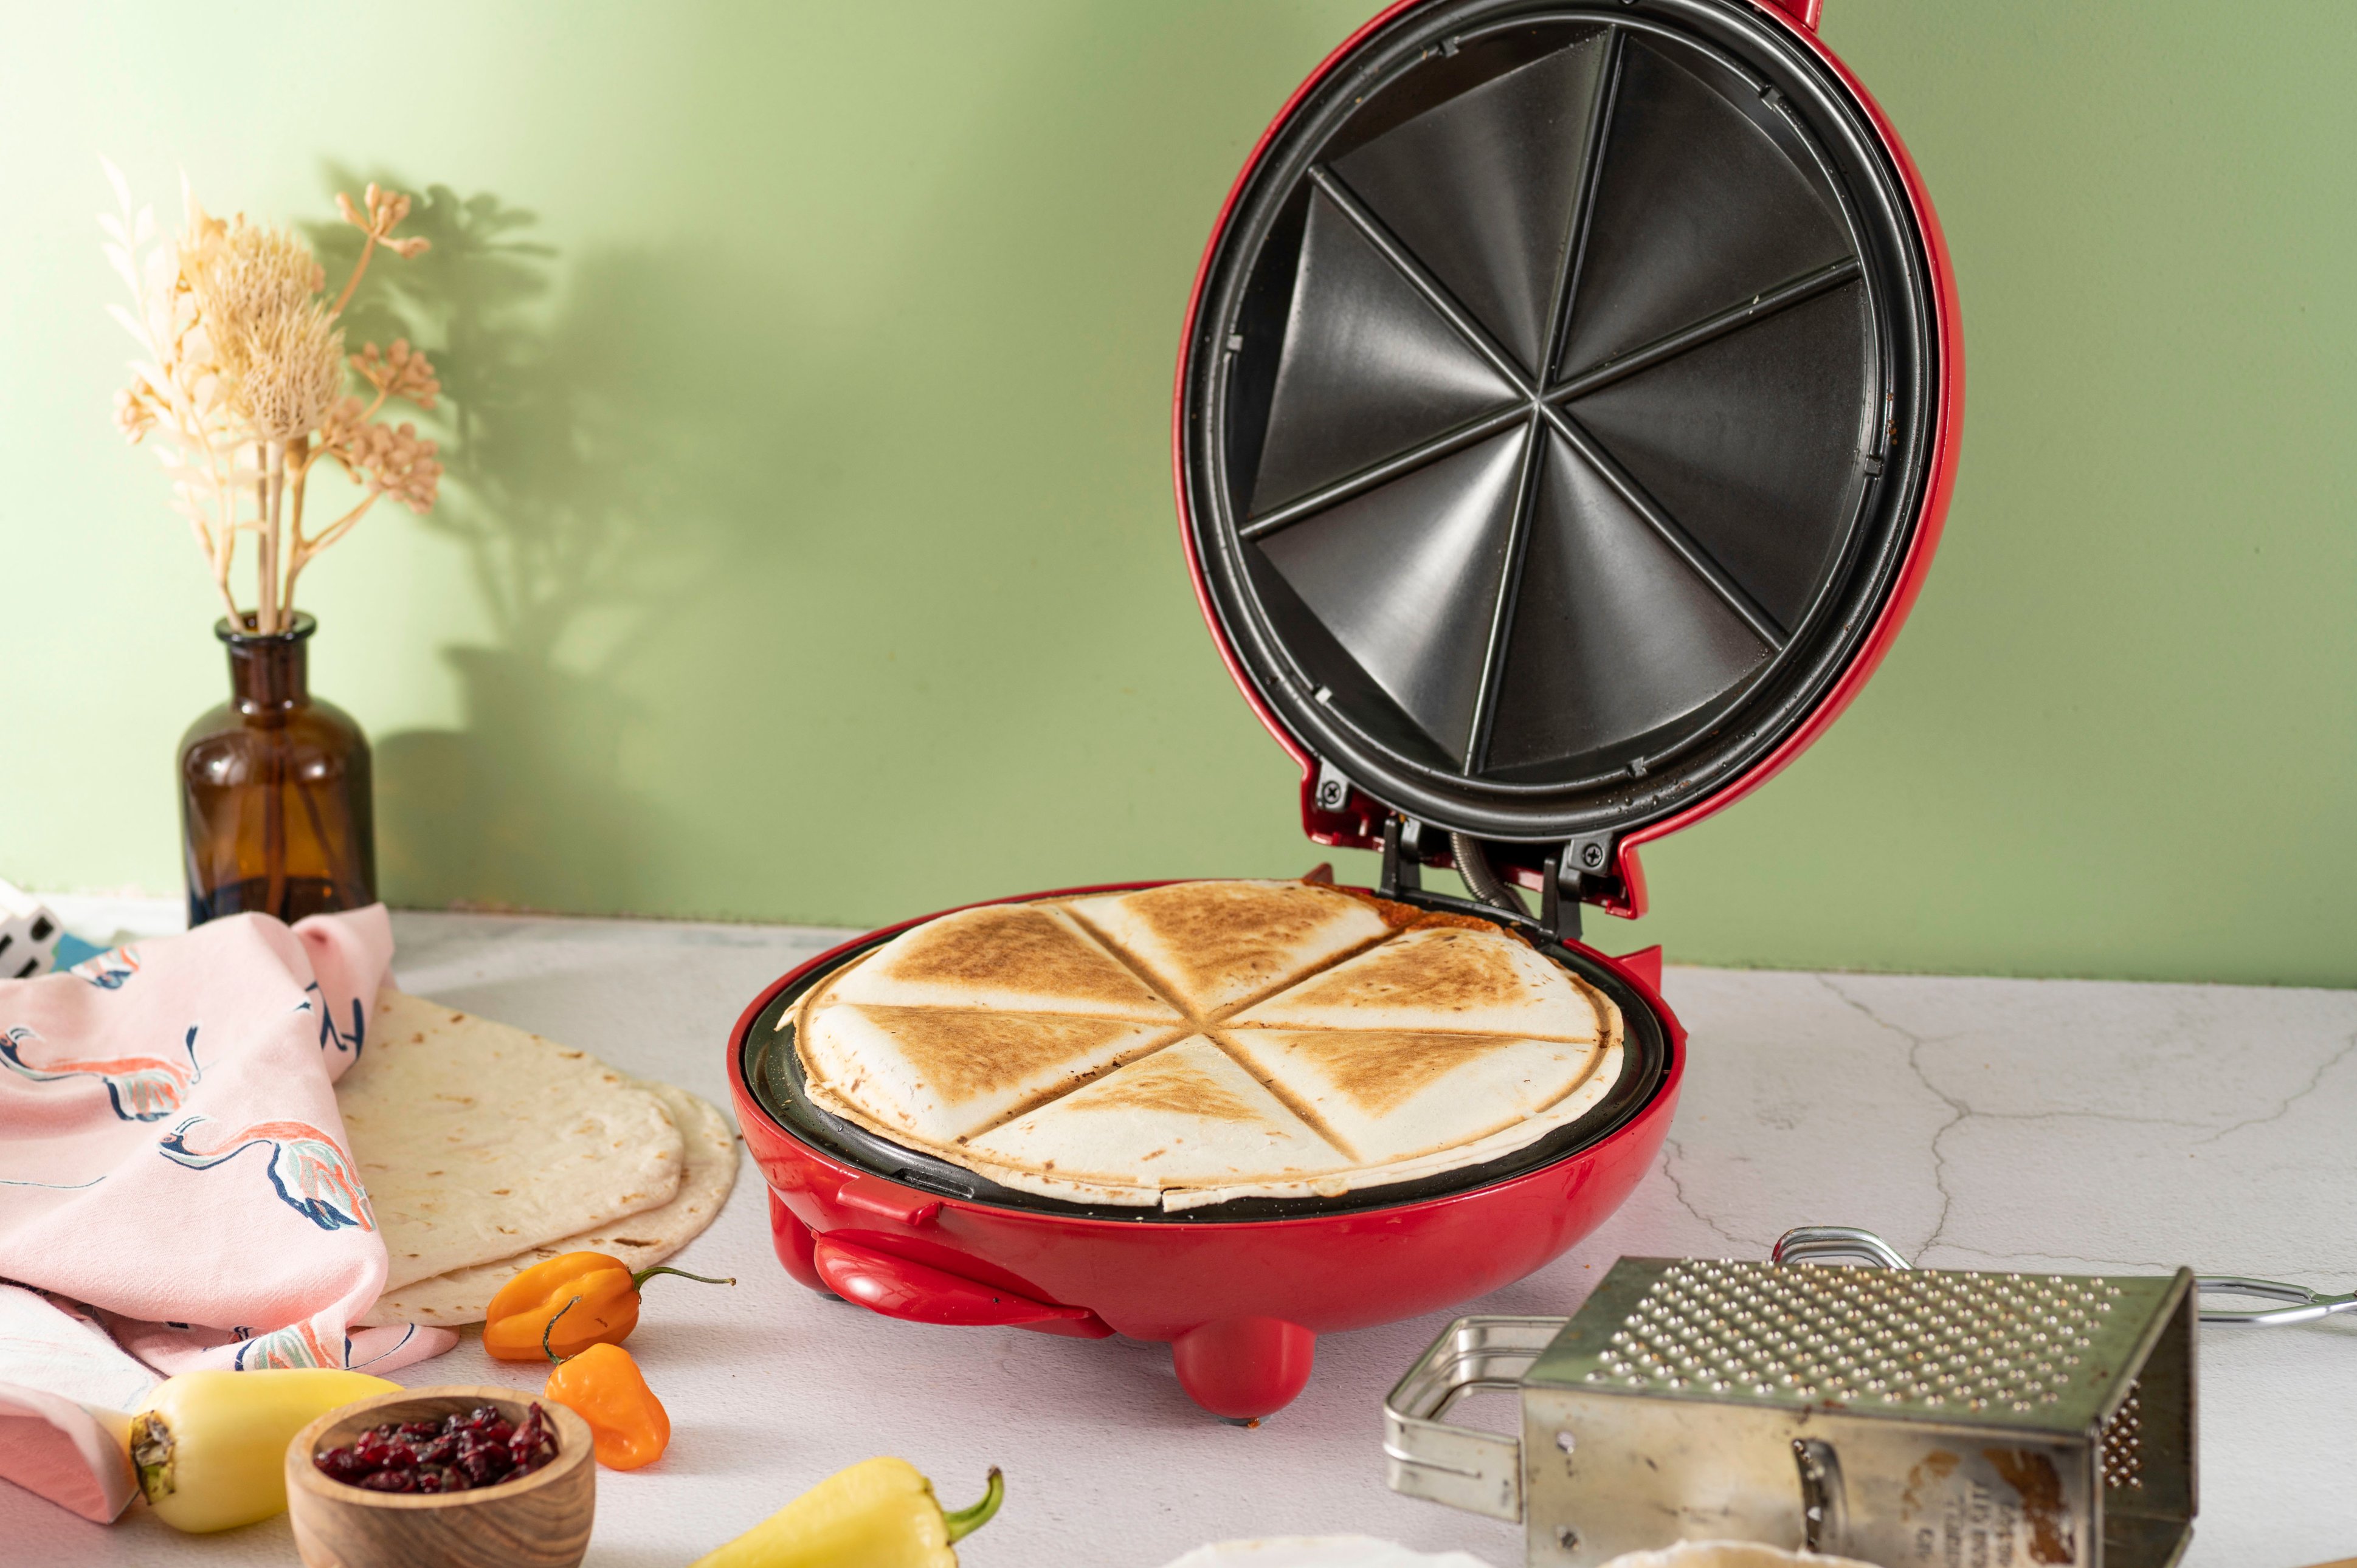 A quesadilla maker. I know their heart was in the right place, but it was HUGE, impossible to clean, and doesn't do anything that I can't already do with a normal non-stick frying pan. One of quickest gifts I've ever gotten rid of after taking it home. It was literally too big for any of our cupboards. u/DevinBelow